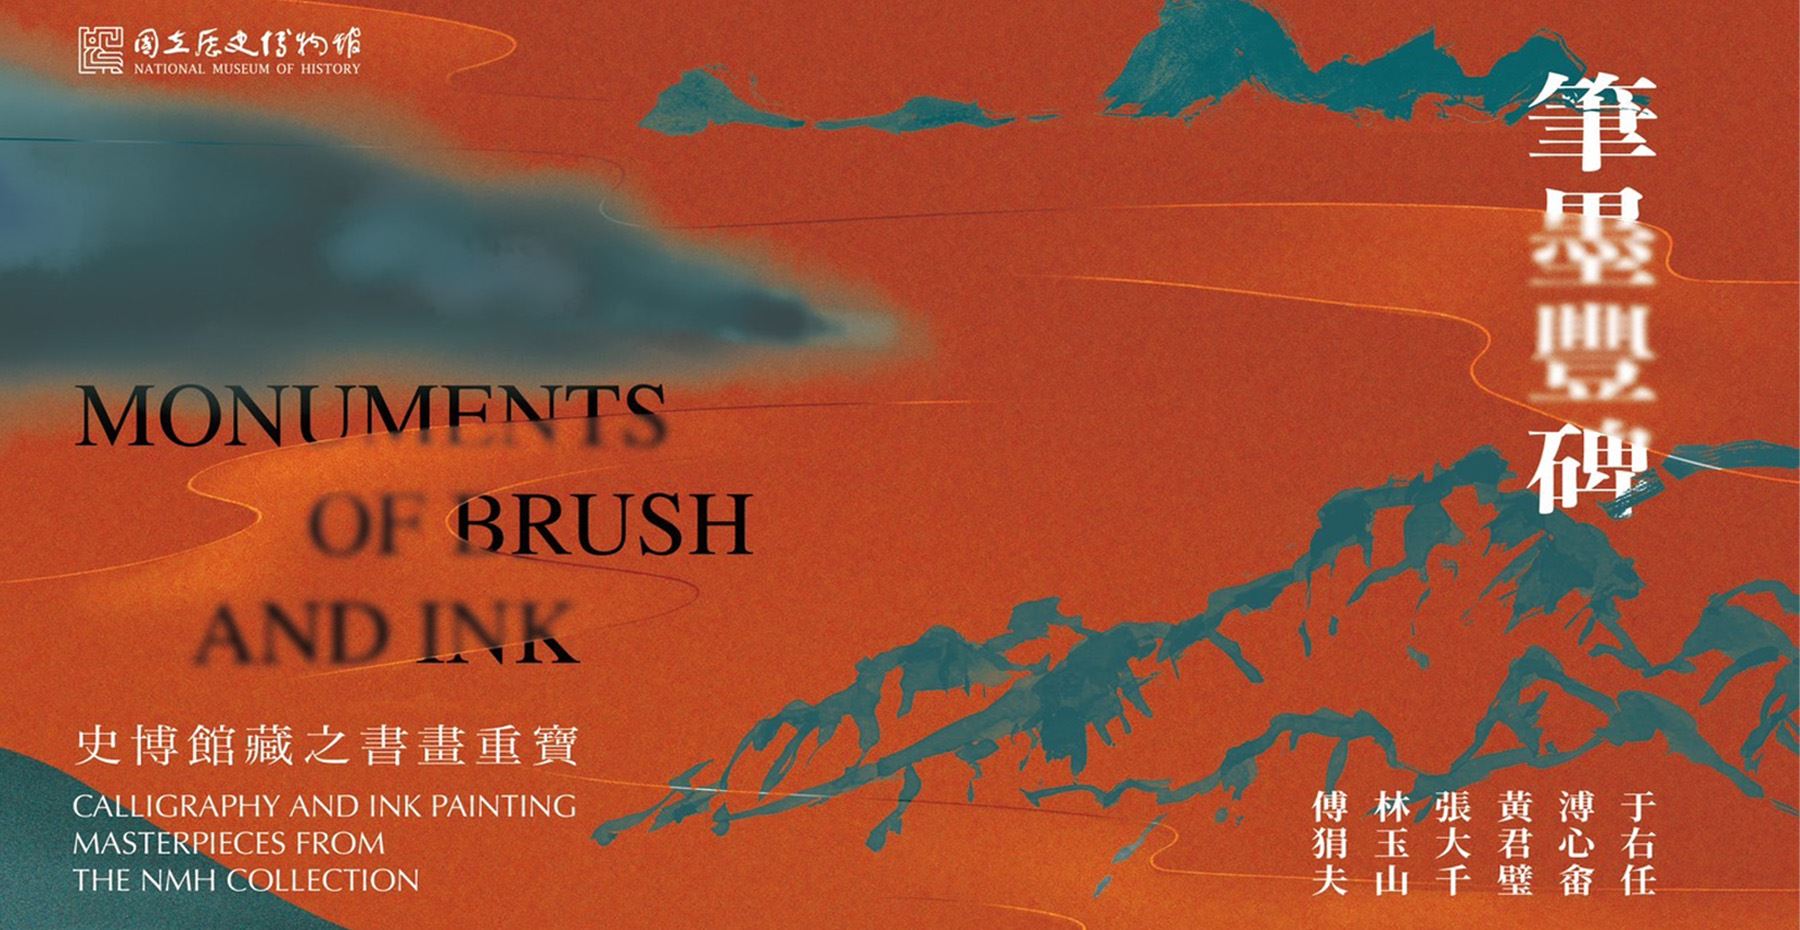 Monuments of Brush and Ink: Calligraphy and Ink Painting Masterpieces from the NMH Collection